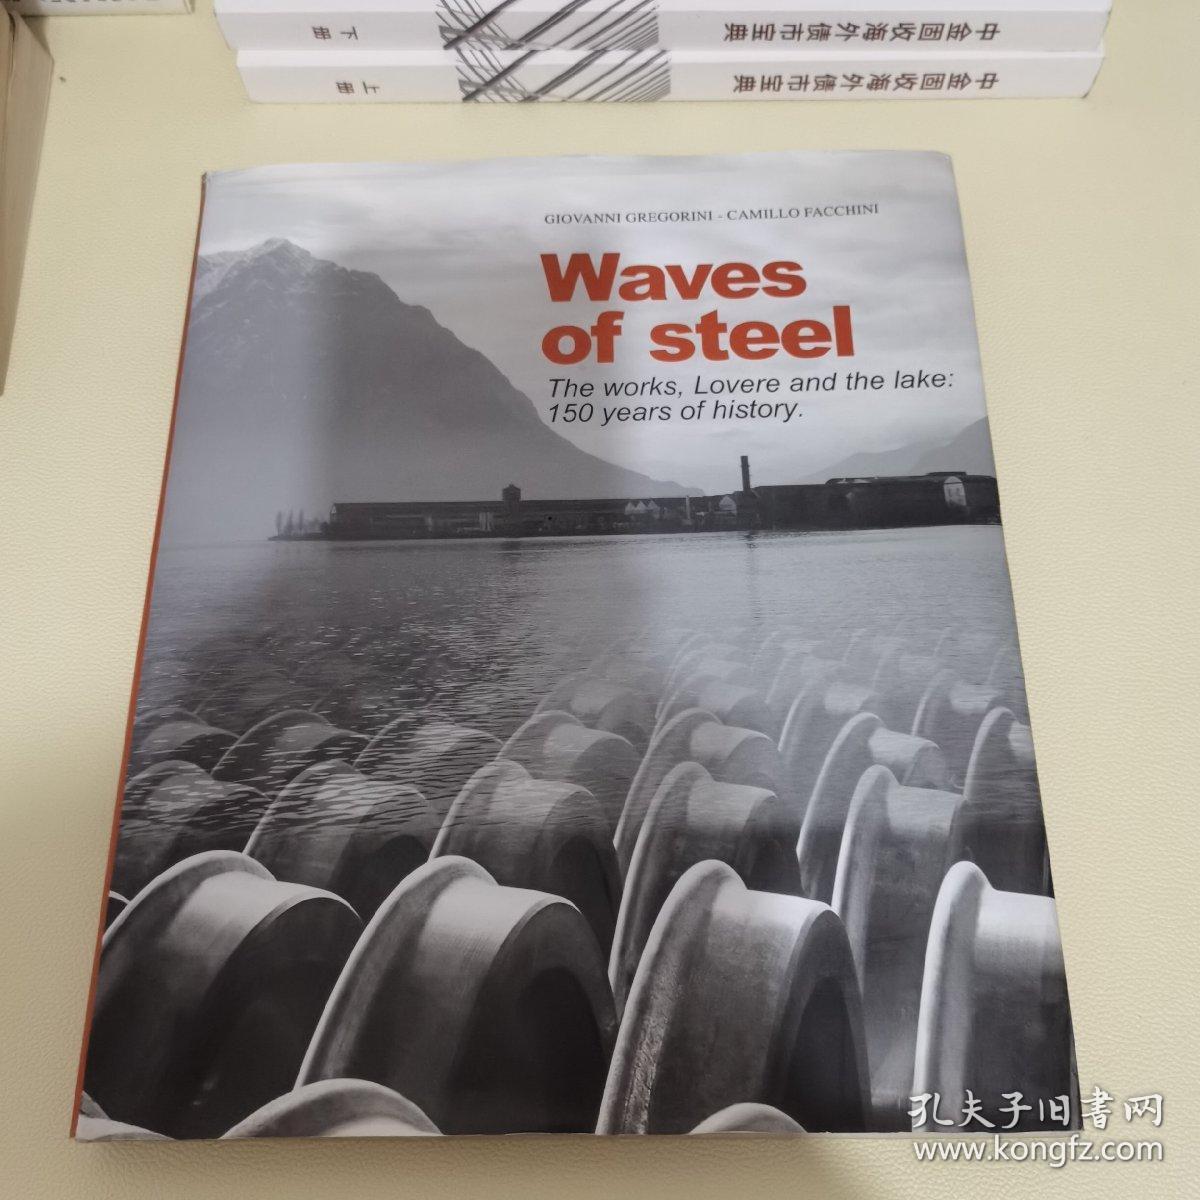 Waves of Steel
The works, Lovere and the lake:150 years of history